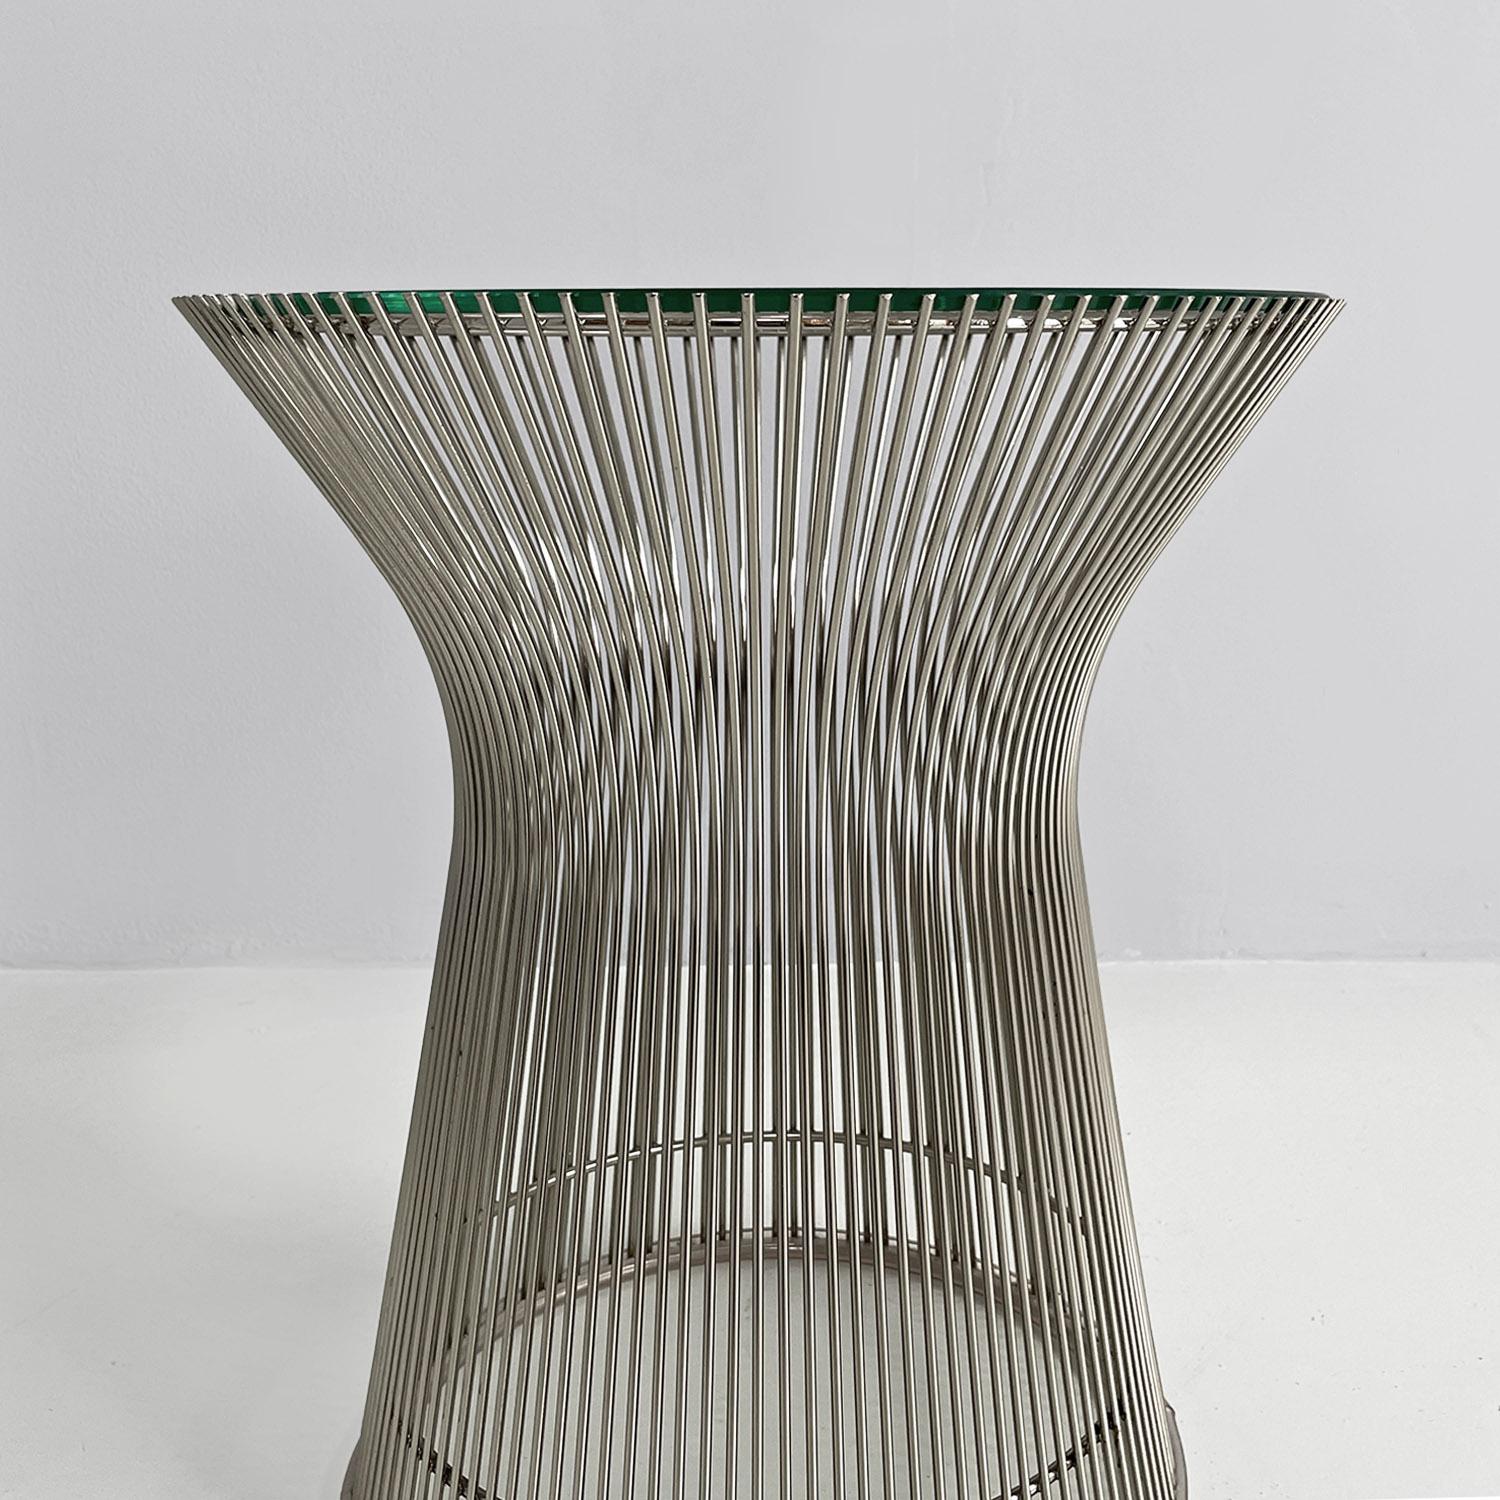 American modern steel and crystal side tables by Warren Platner for Knoll, 1966 For Sale 2